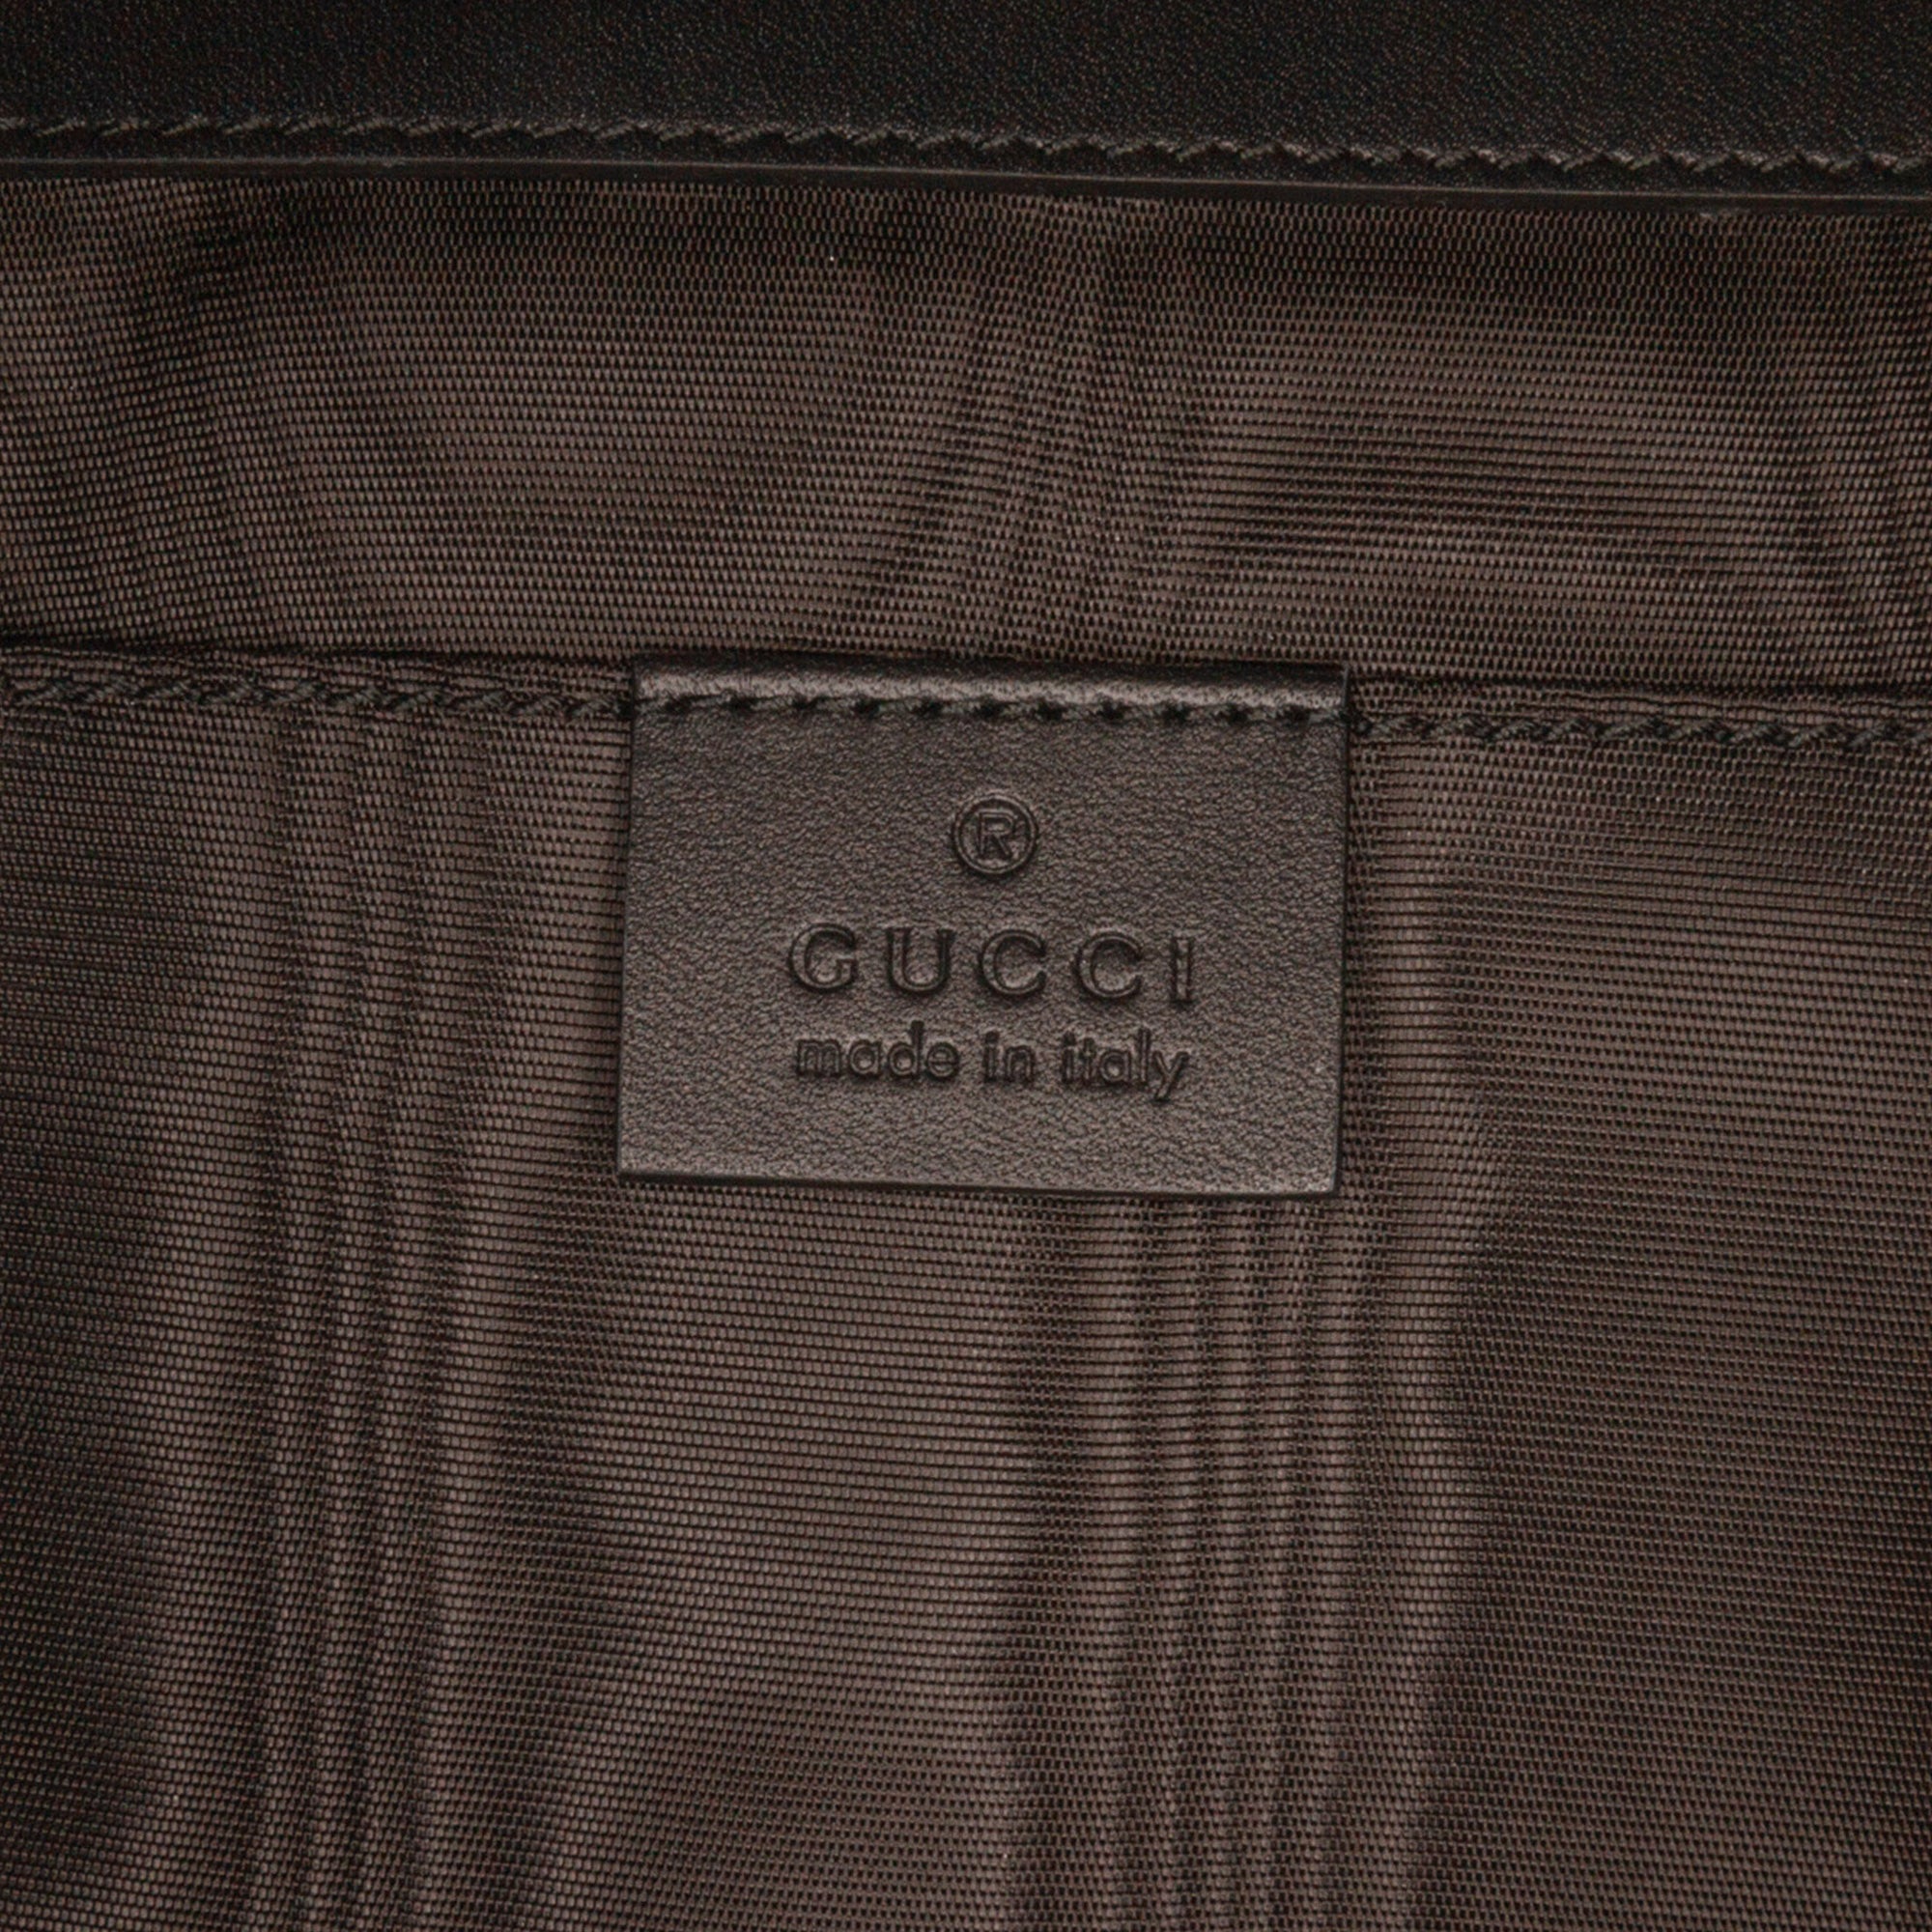 Gucci - Authenticated Guccy Clutch Clutch Bag - Patent Leather Brown for Women, Good Condition